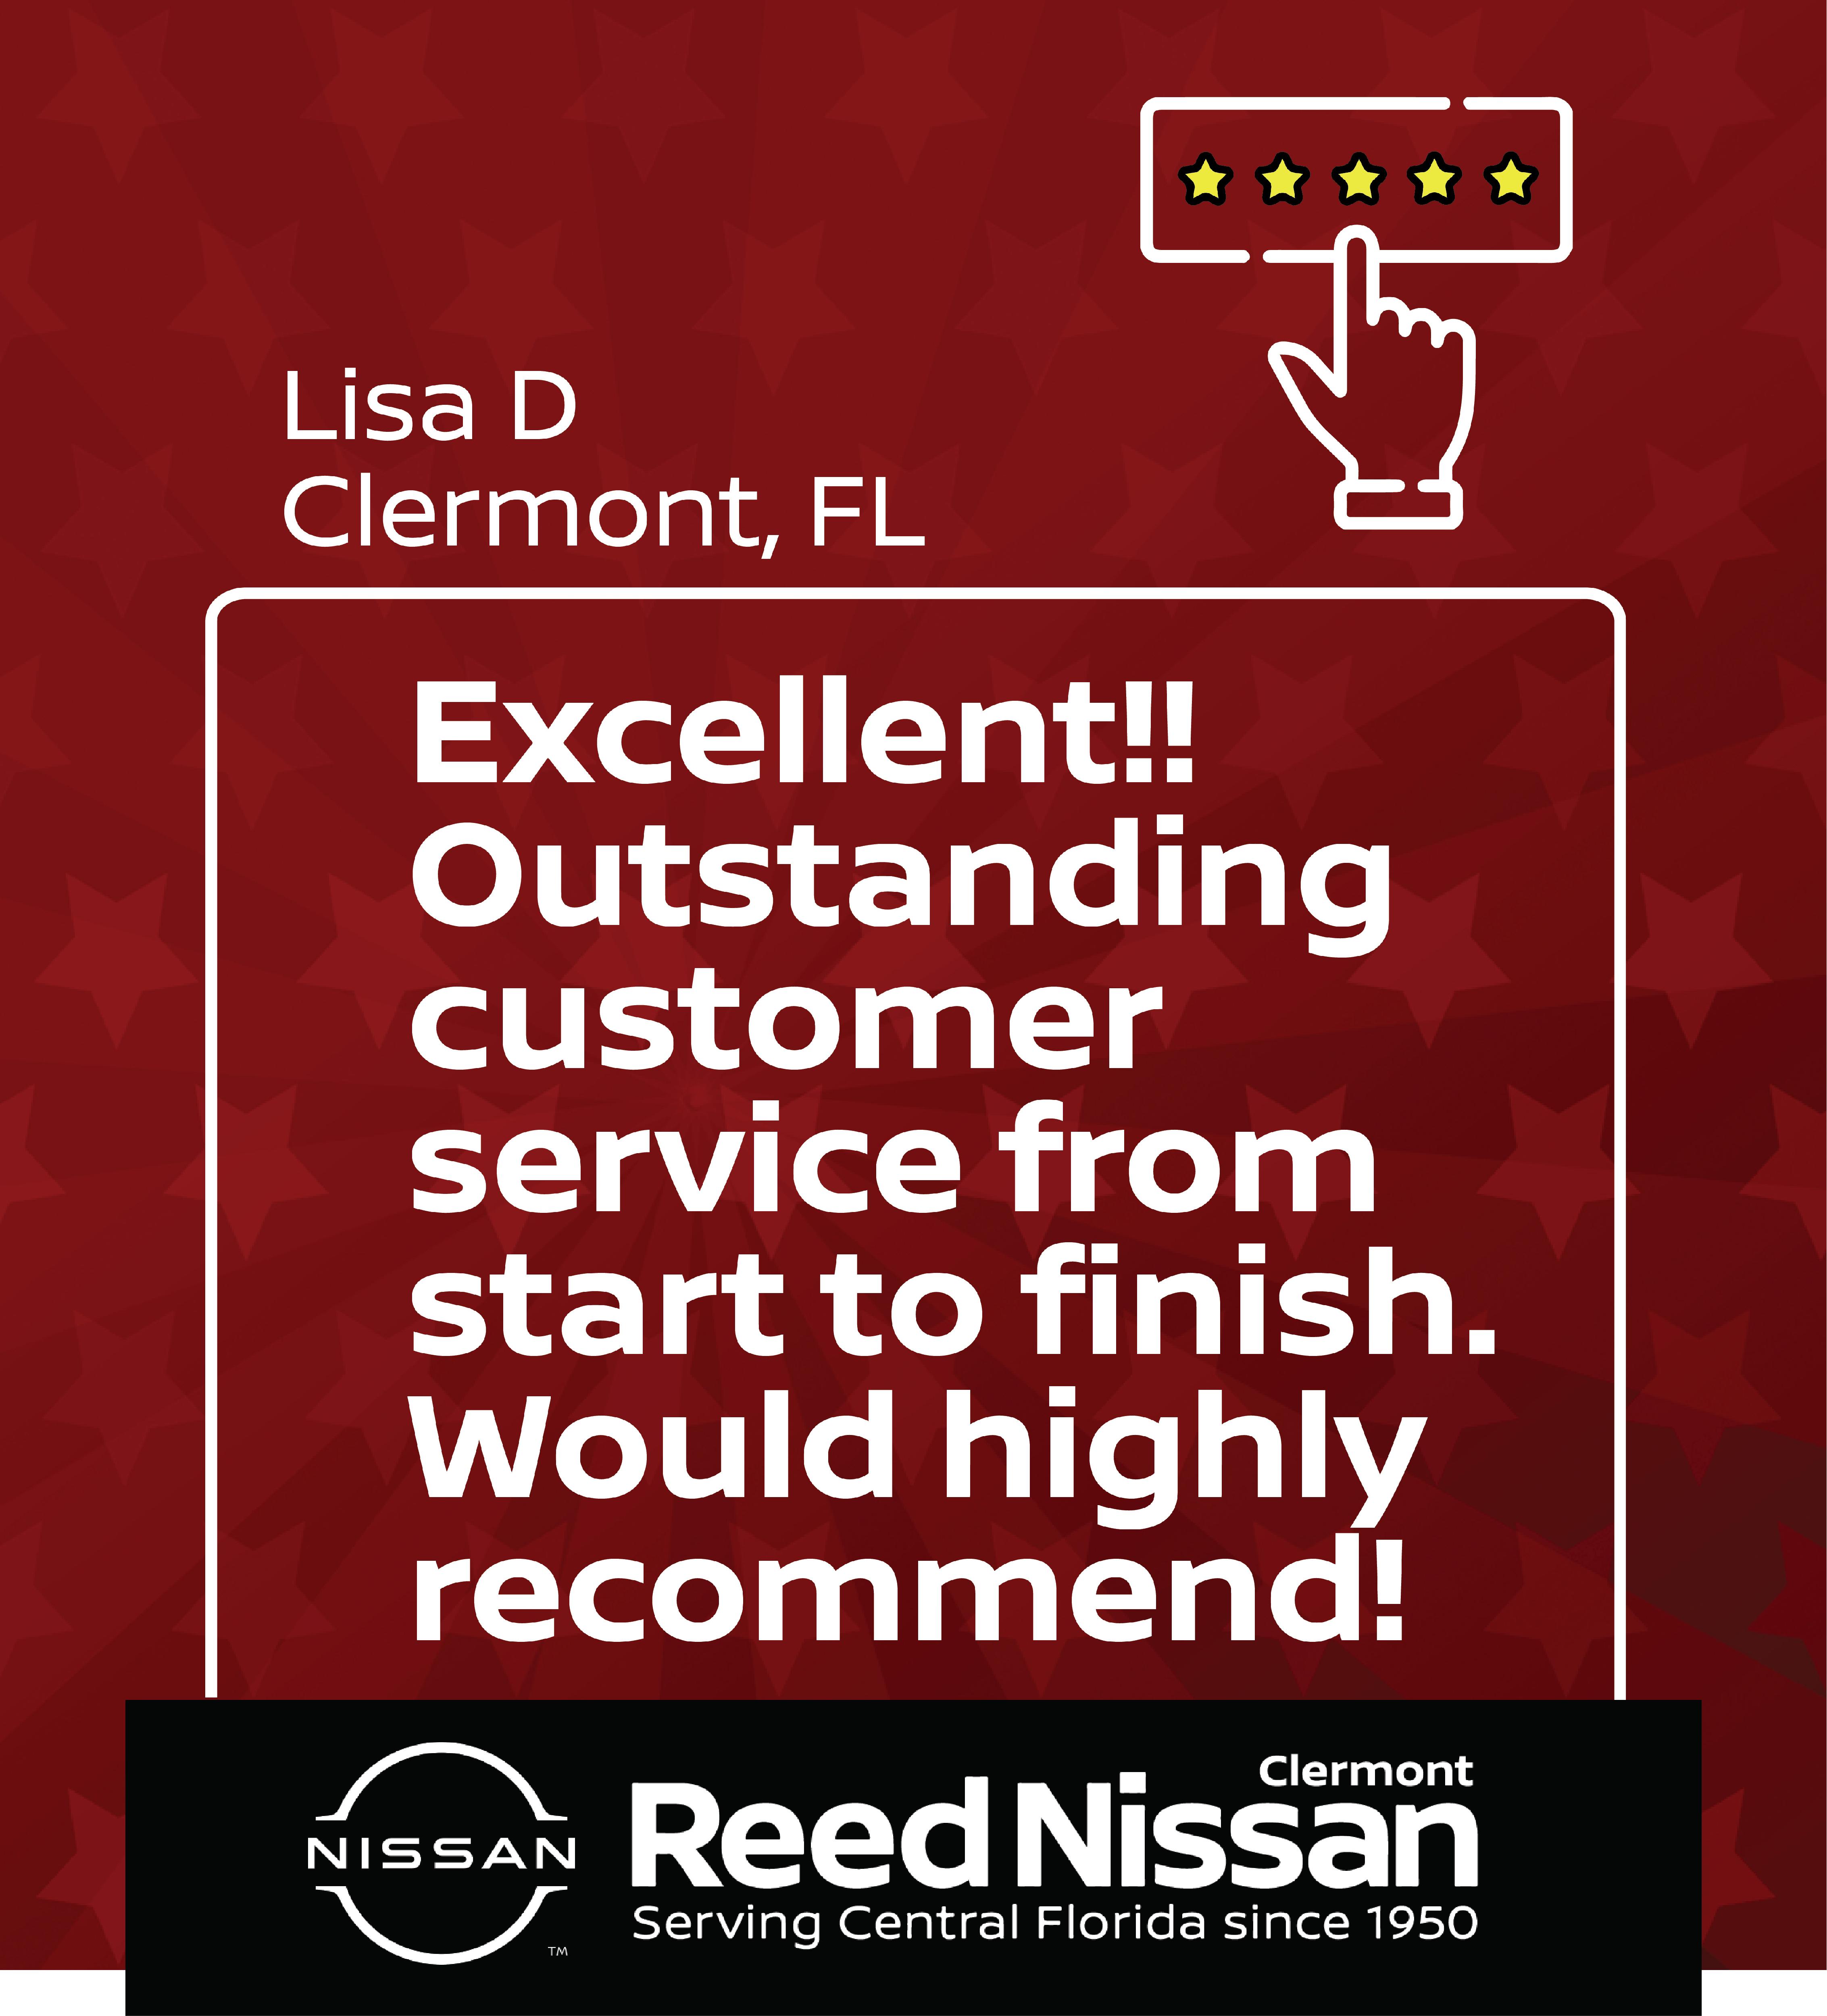 Reed Nissan Clermont is a Clermont Nissan dealer and a new car and used